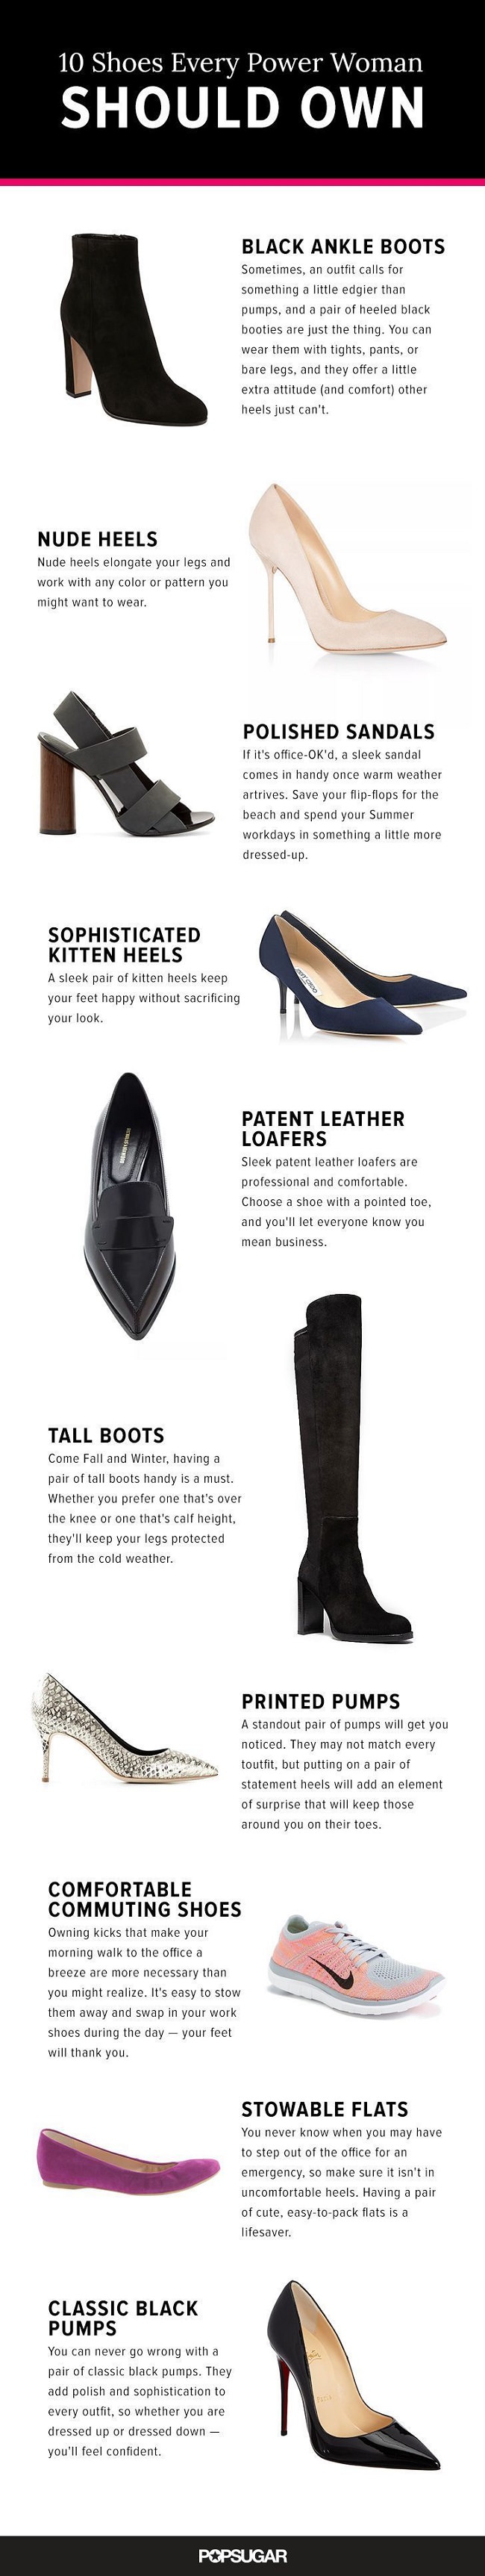 Choosing the perfect work shoes is as important as choosing your work outfits to send the right message. And here're the 10 shoe types to consider!